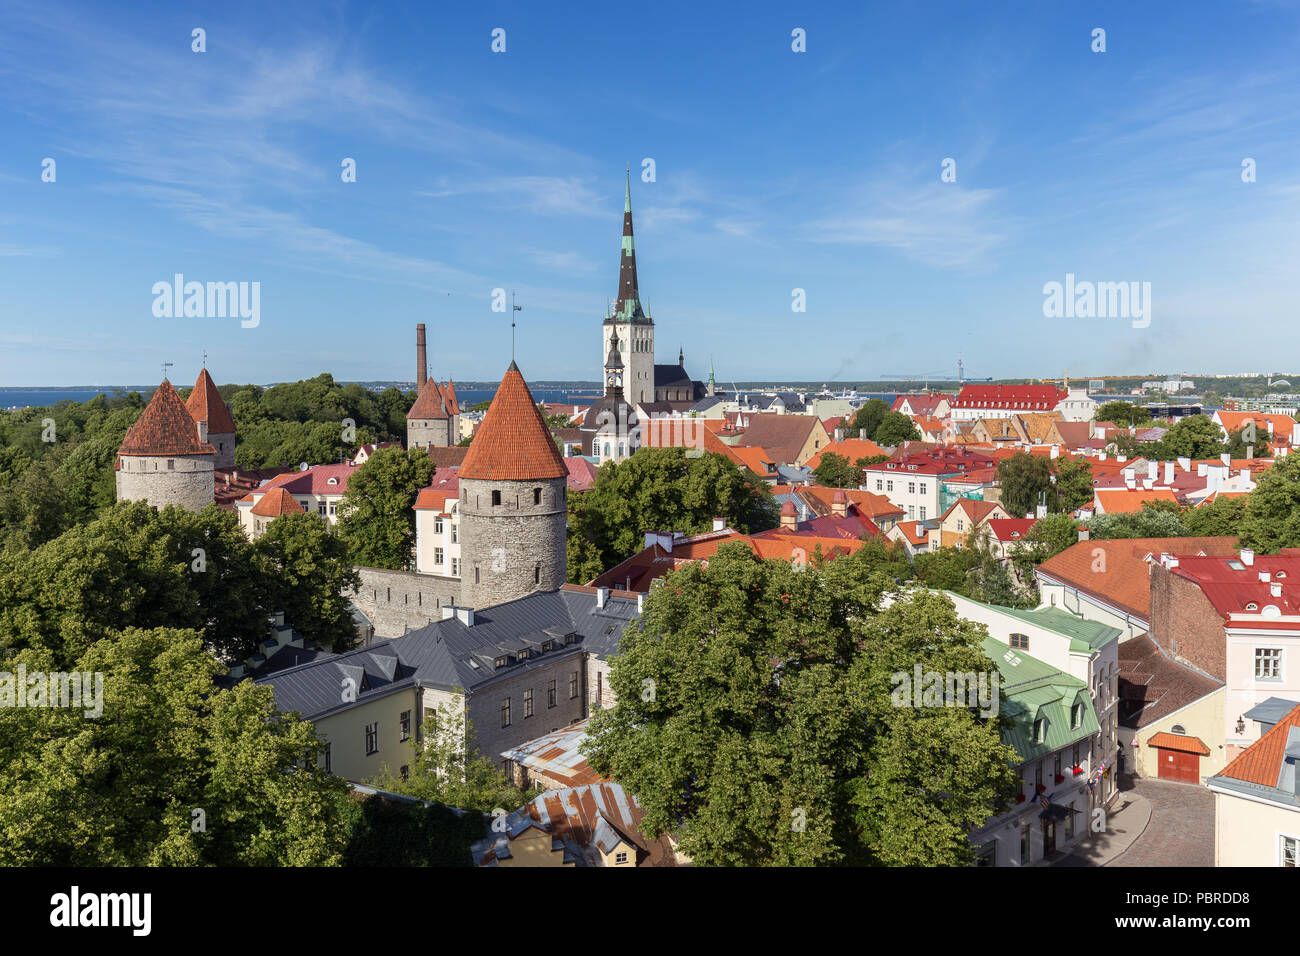 City walls' and St. Olaf's (or Olav's) church's towers and other buildings at the Old Town in Tallinn, Estonia, viewed from above in the summer. Stock Photo